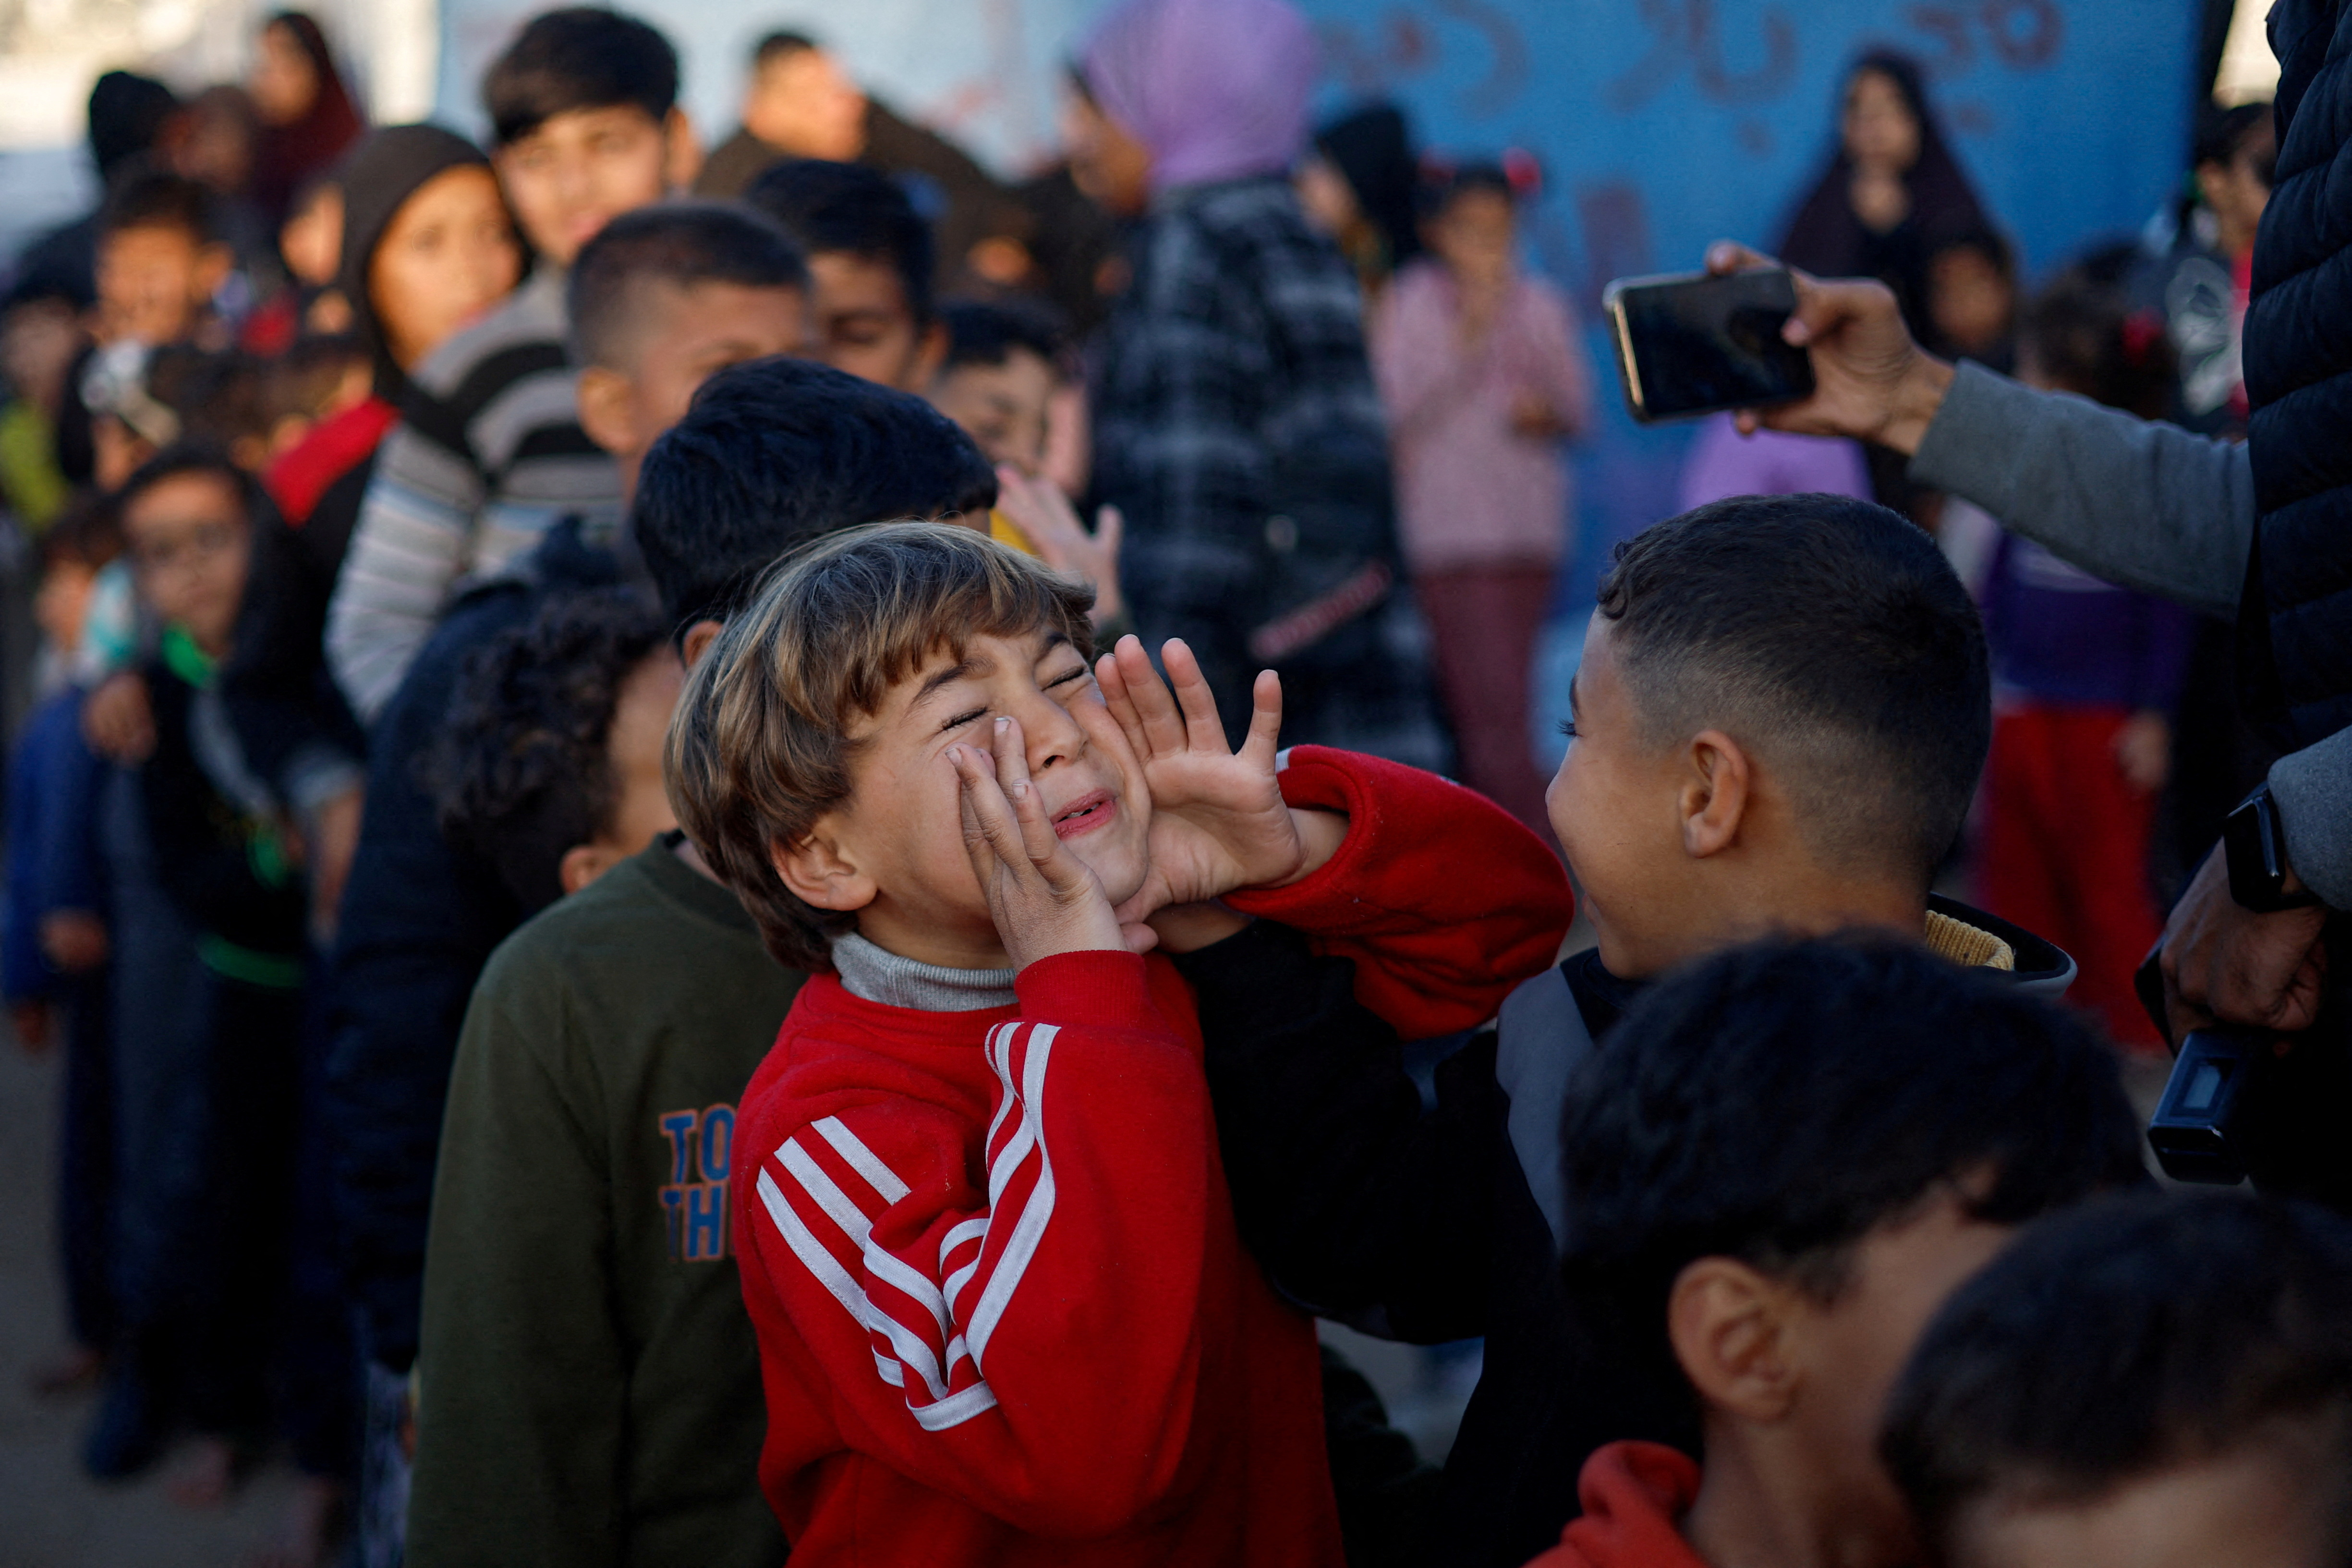 Displaced Palestinian children take part in an entertaining activity organised by local activists at an UNRWA school in Rafah